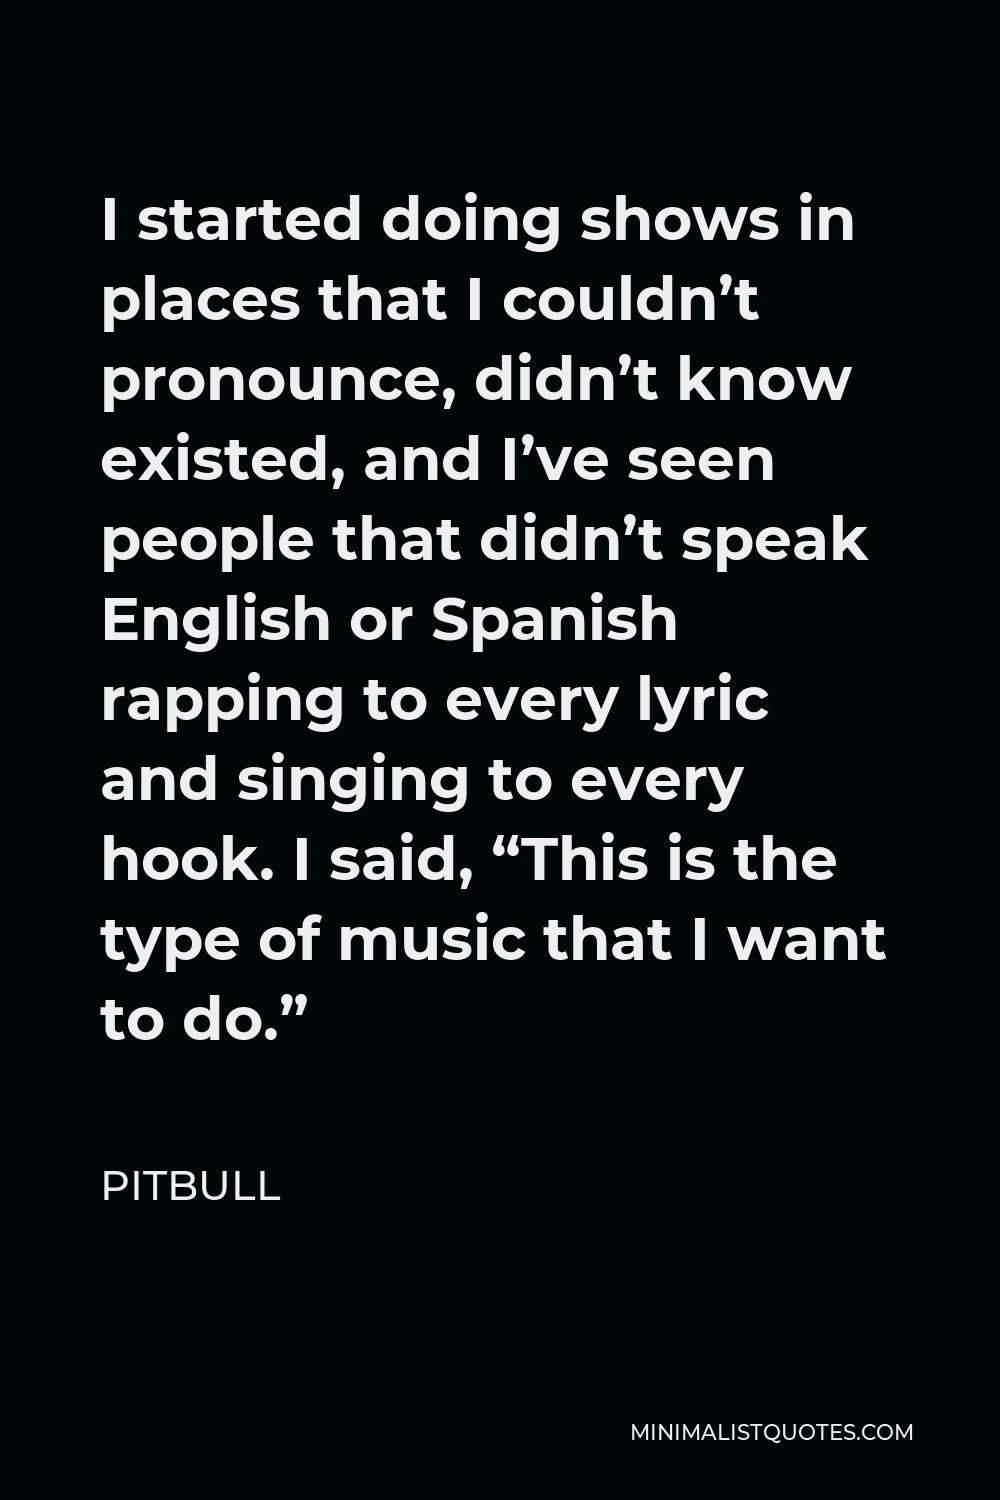 Pitbull Quote - I started doing shows in places that I couldn’t pronounce, didn’t know existed, and I’ve seen people that didn’t speak English or Spanish rapping to every lyric and singing to every hook. I said, “This is the type of music that I want to do.”